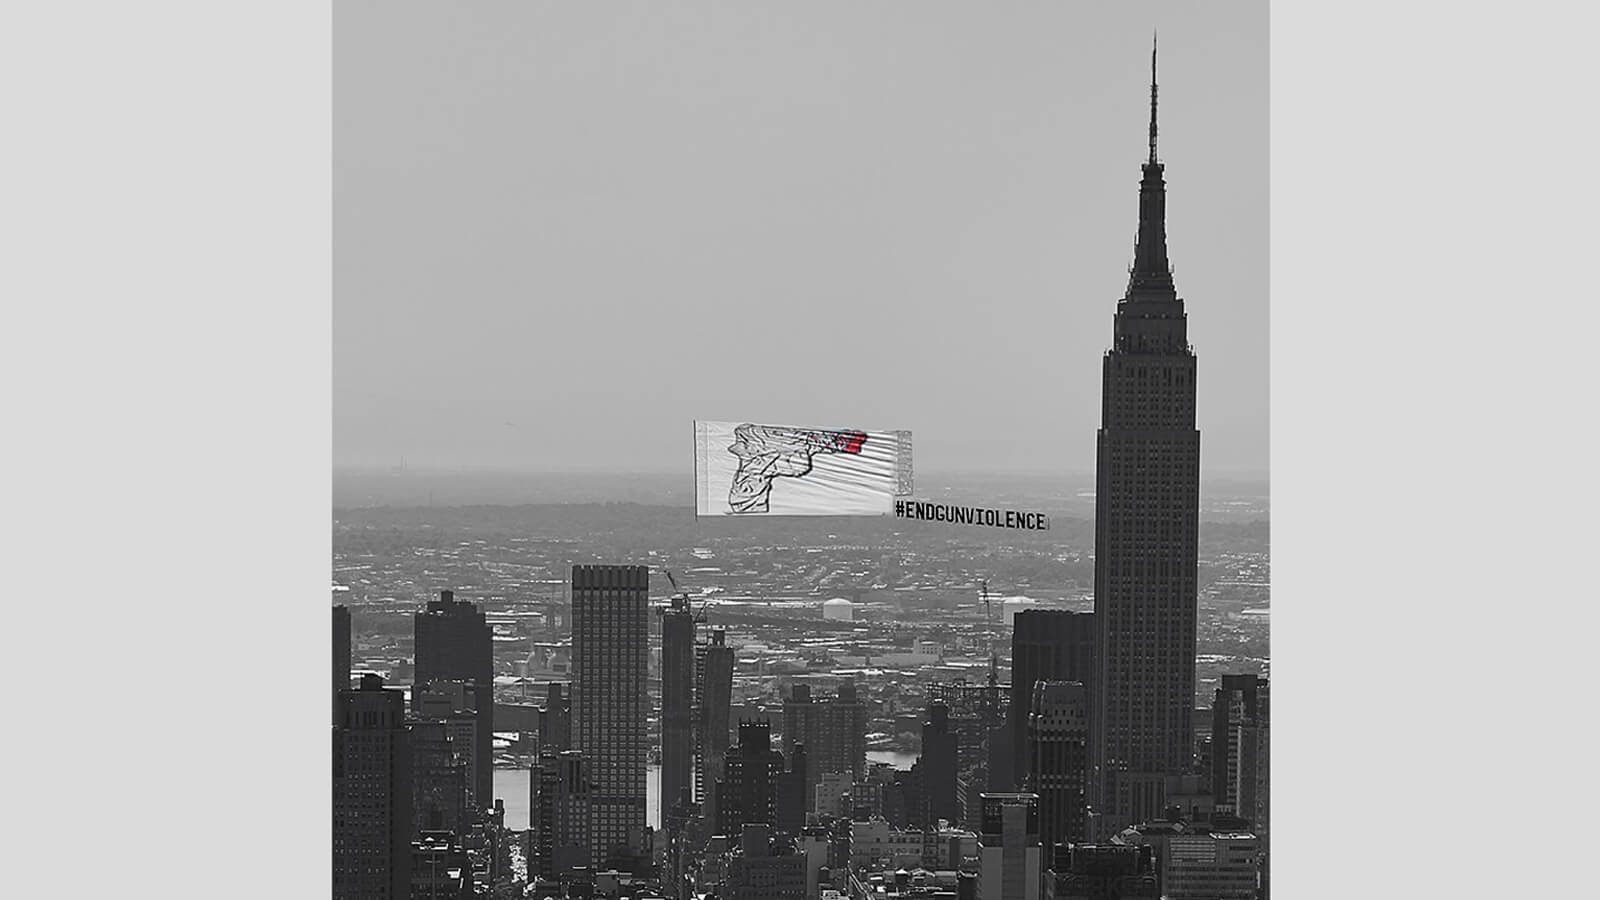 Image of gun violence protest banner over New York City